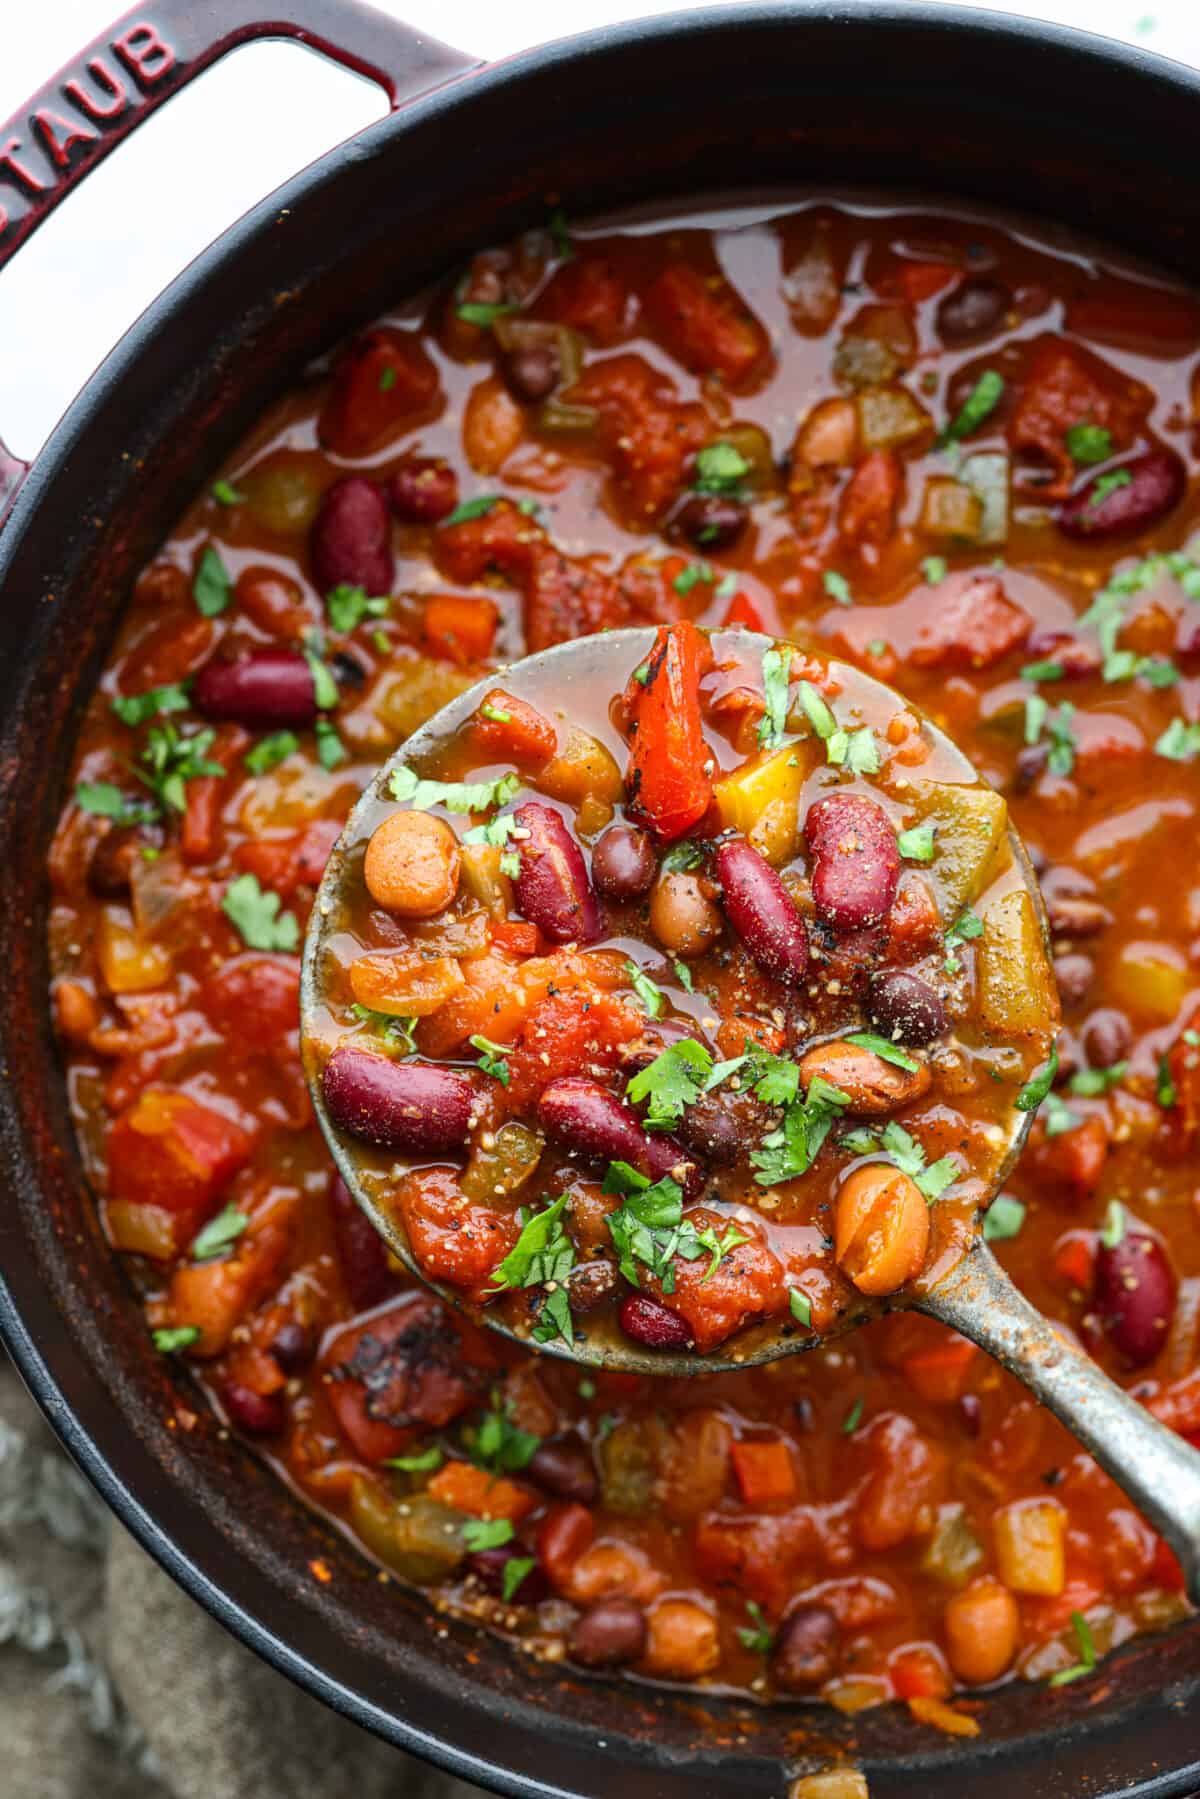 Close overhead view of vegetarian chili in a large pot. A ladle is lifting up a scoop of chili.